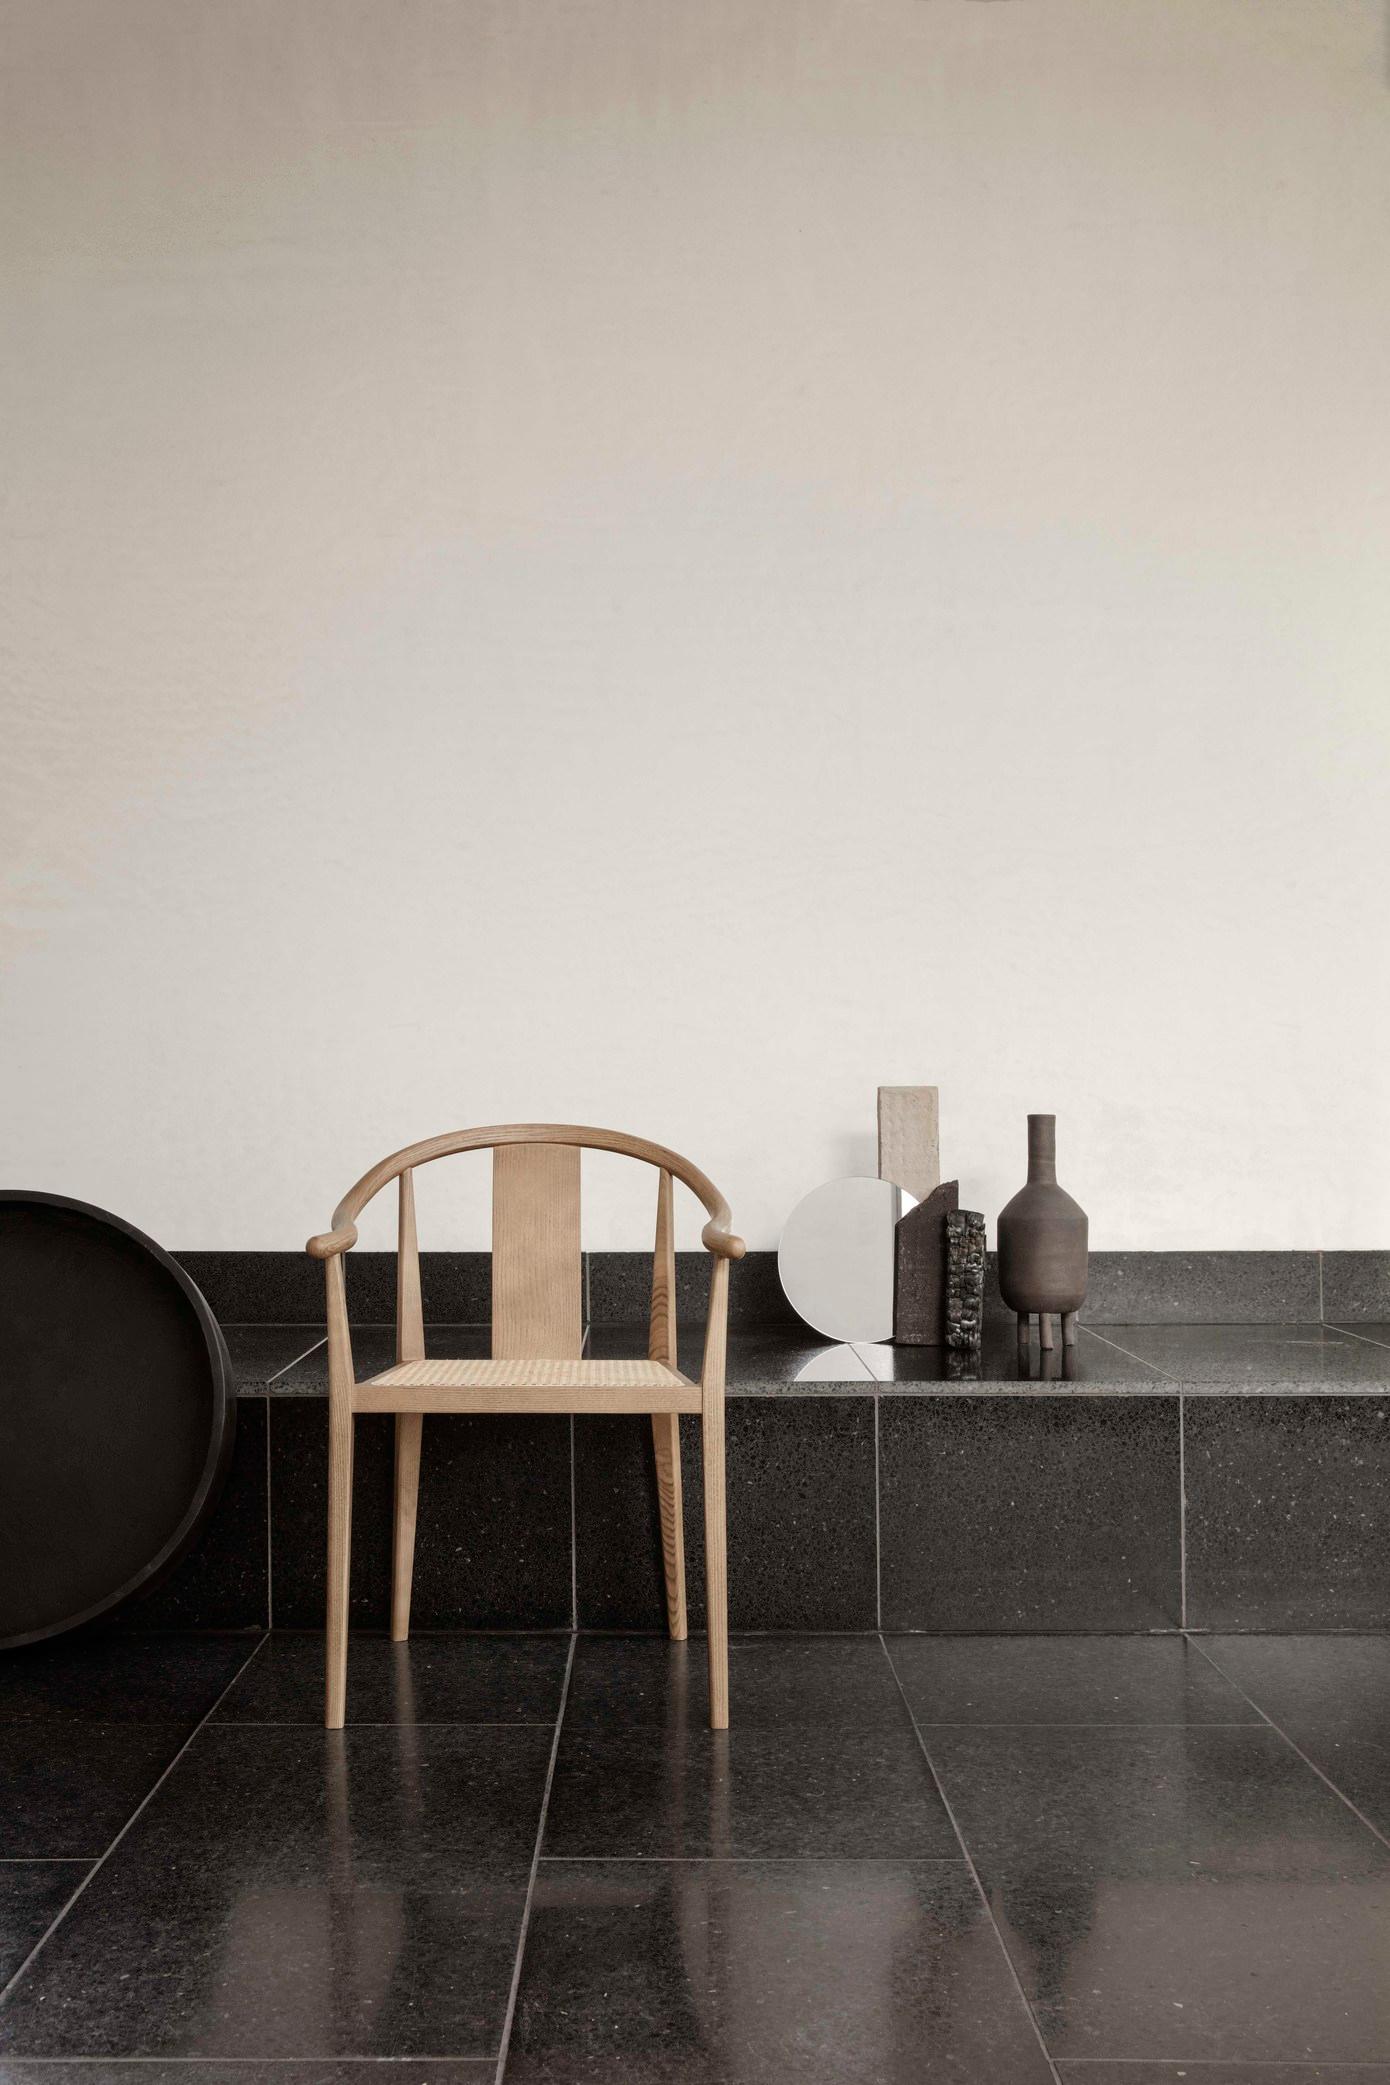 Scandinavian chair 'Shanghai' by Norr11
Designed by Rune Krojgaard & Knut Bendik Humlevik, 2011

Model in the picture: 
Frame: Light Smoked Oak
Seat: Natural Rattan
Available as well with paper cord, french rattan or various